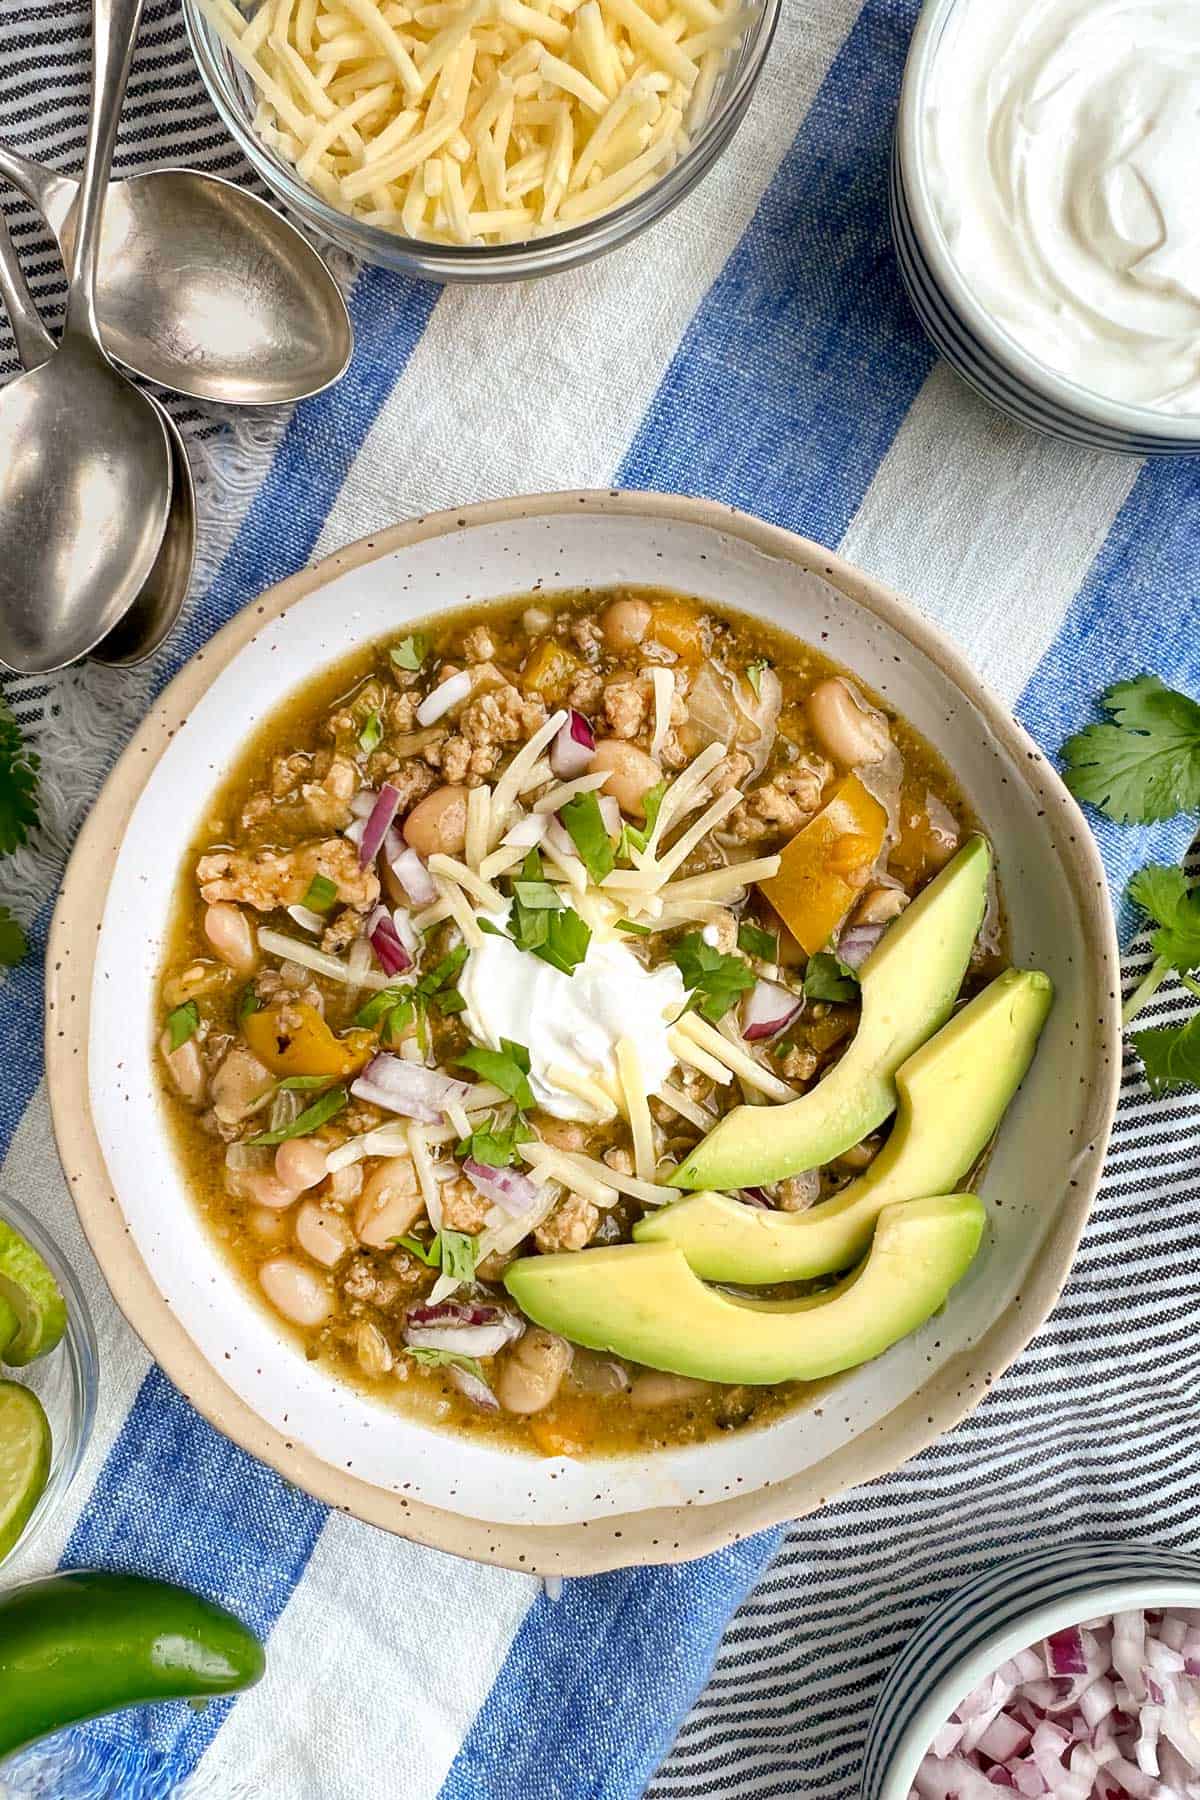 bowl of turkey chili garnished with sliced avocado, shredded cheese, sour cream and chopped cilantro, bowls of garnishes on the side